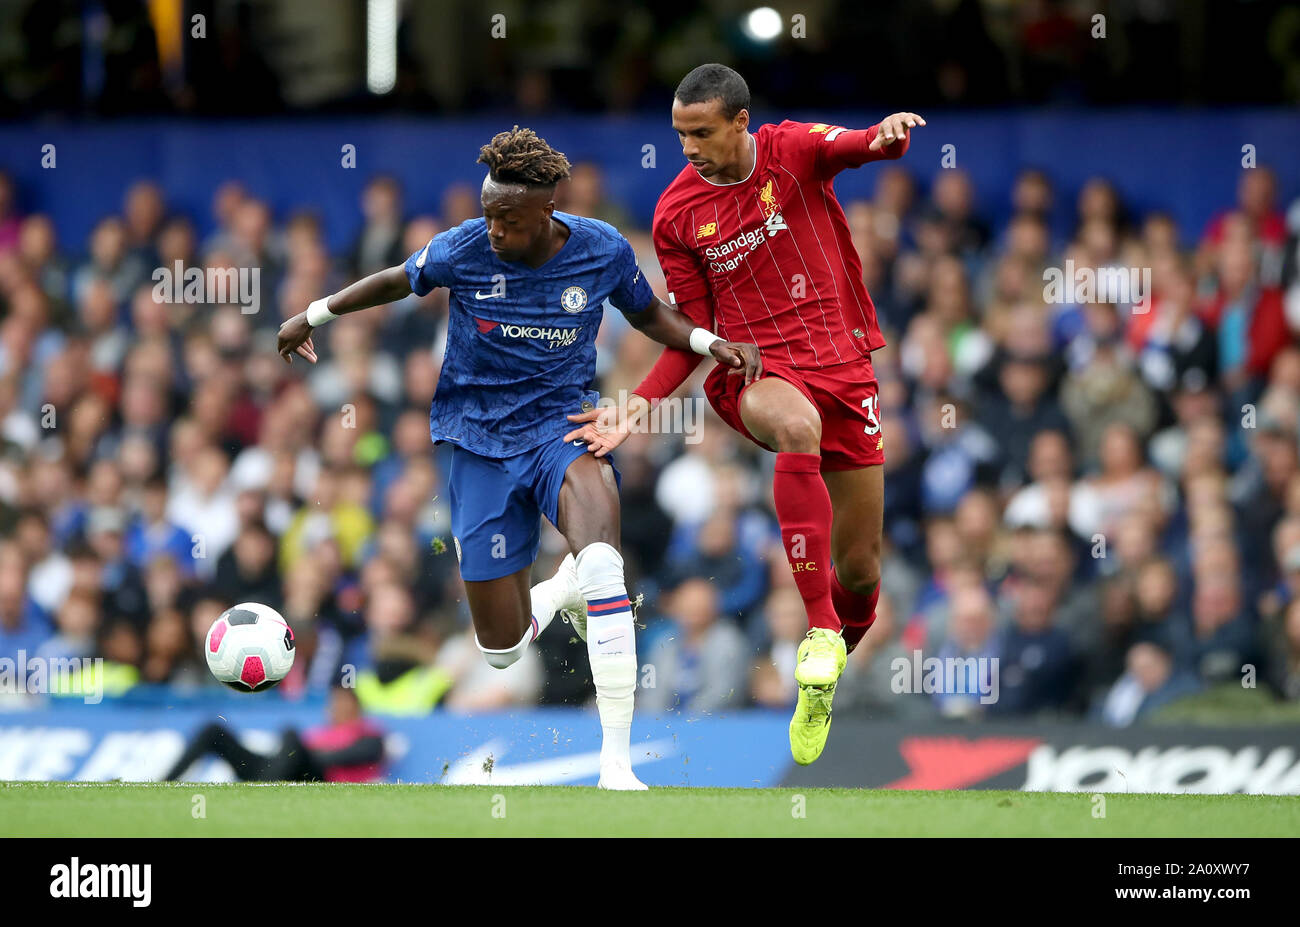 Chelsea's Tammy Abraham (left) and Liverpool's Joel Matip (right) battle for the ball during the Premier League match at Stamford Bridge, London. Stock Photo